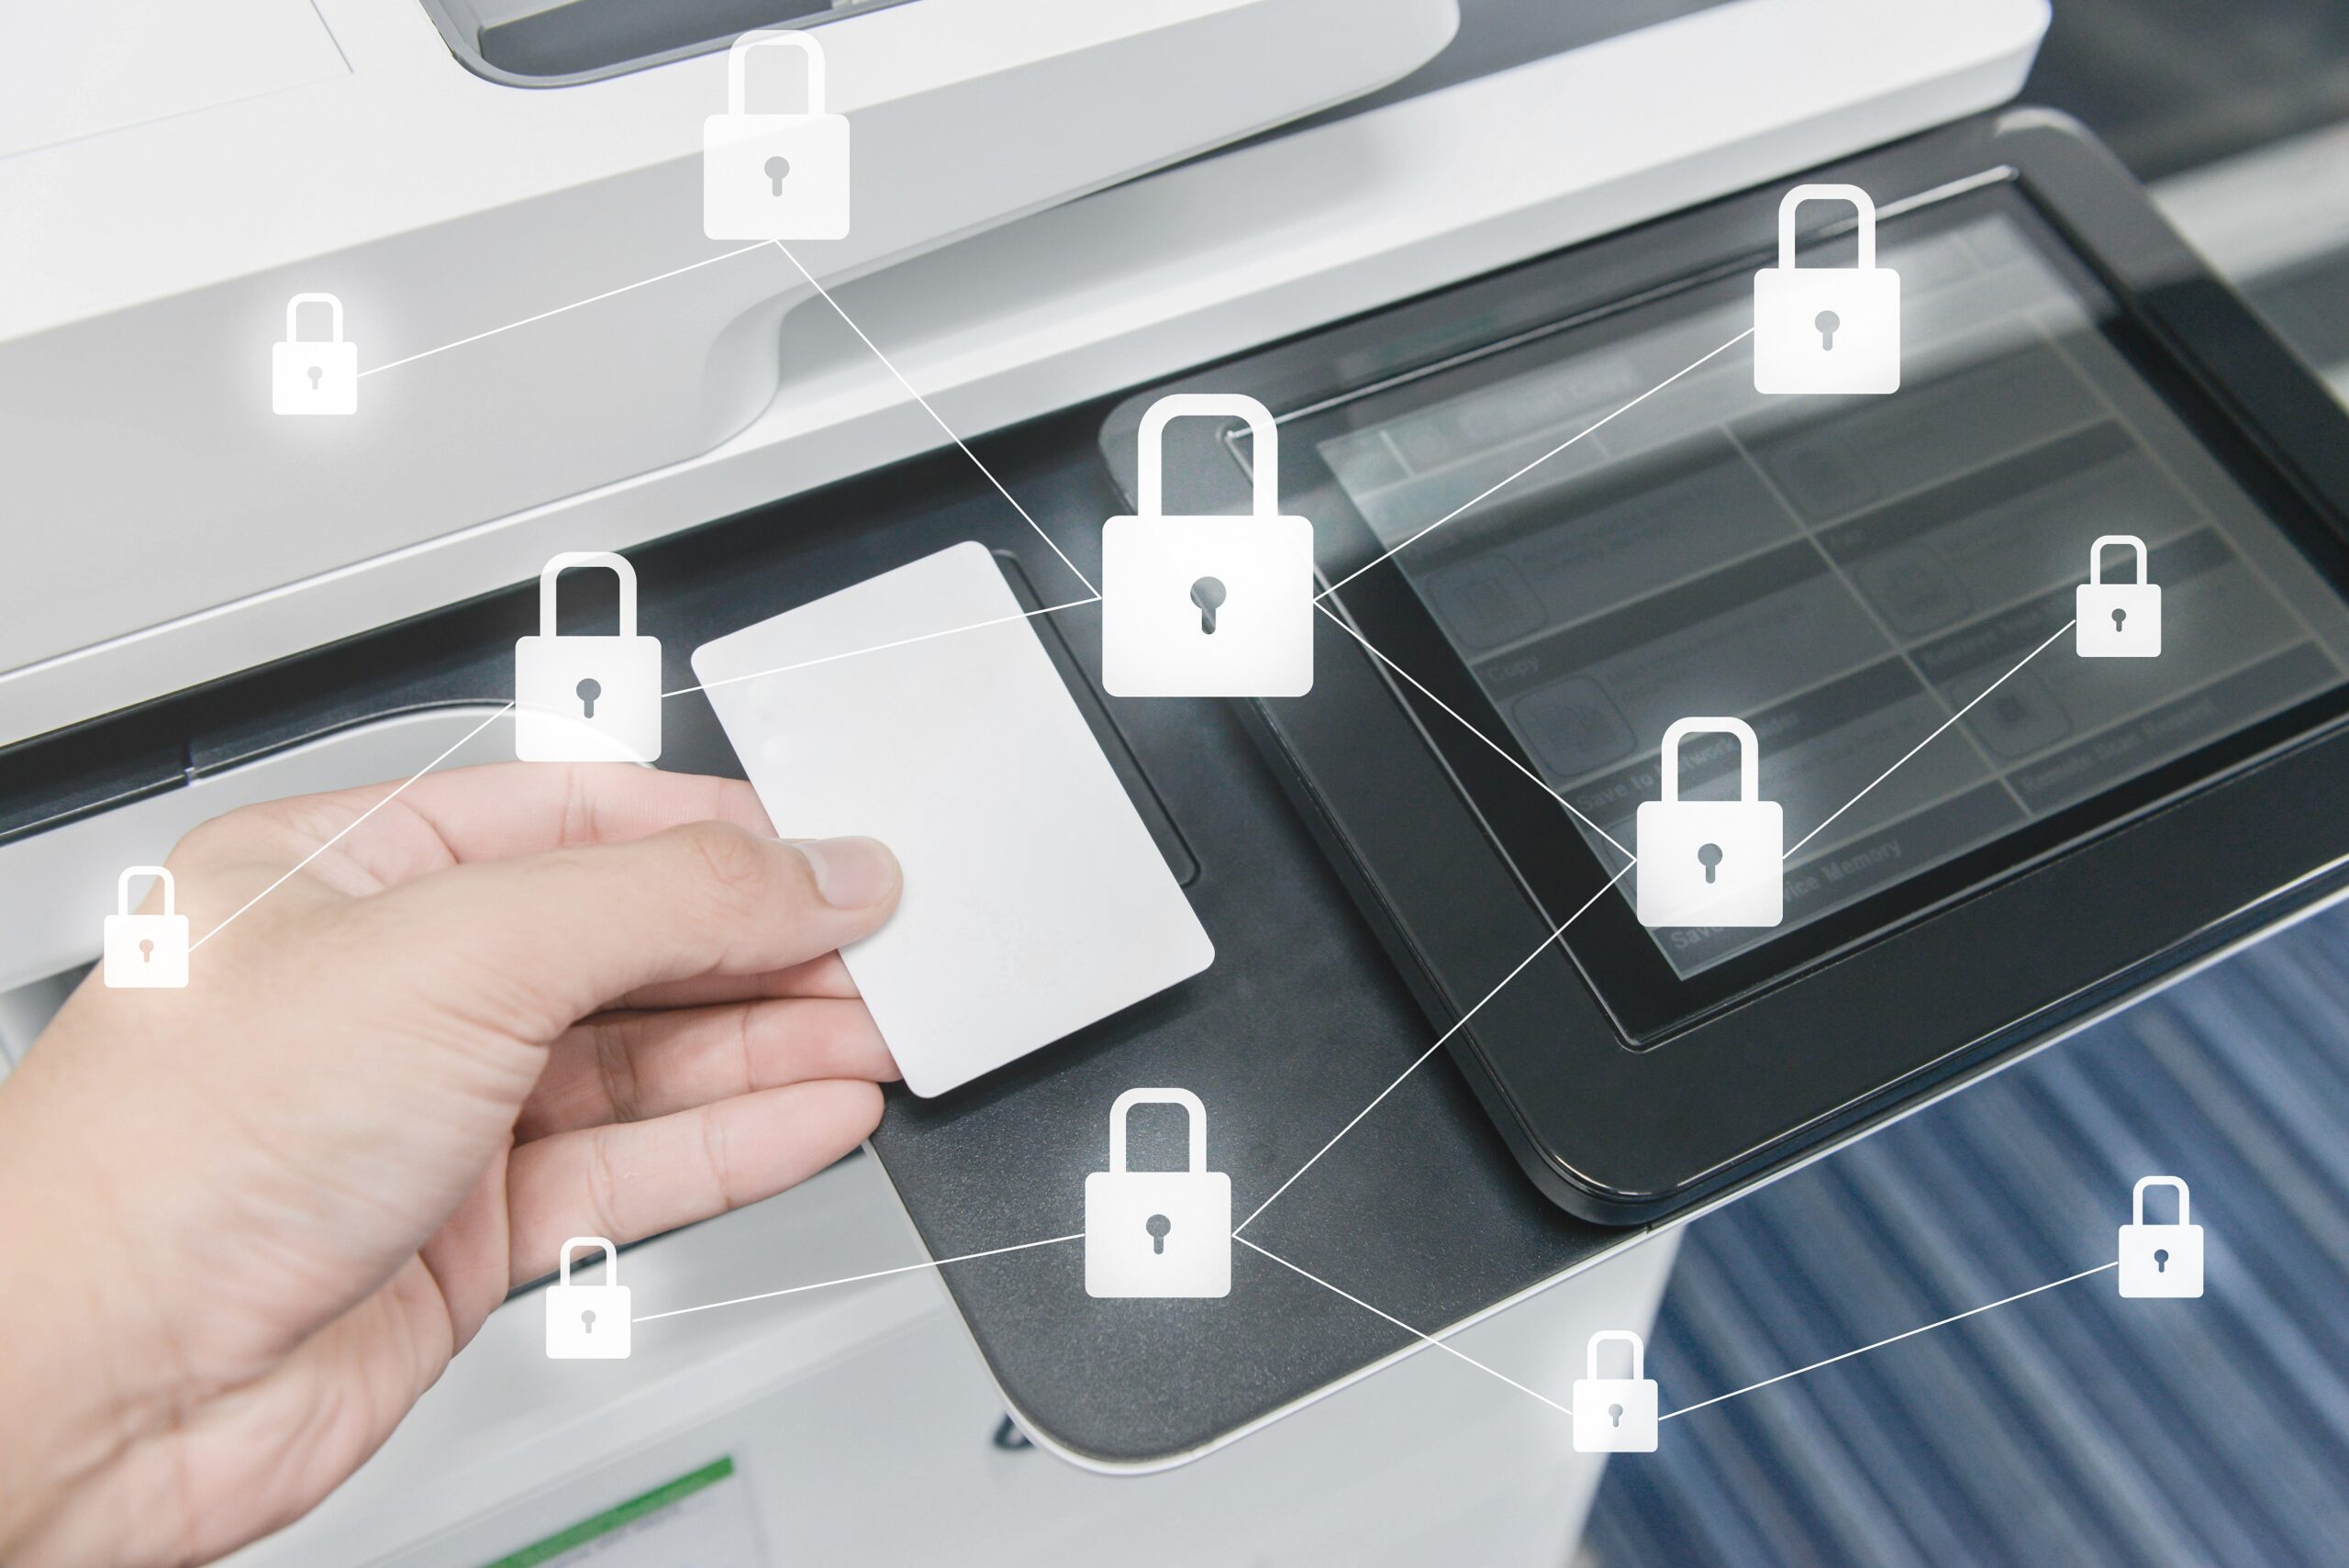 An Incovenient Truth About Printer Security Proves Accurate